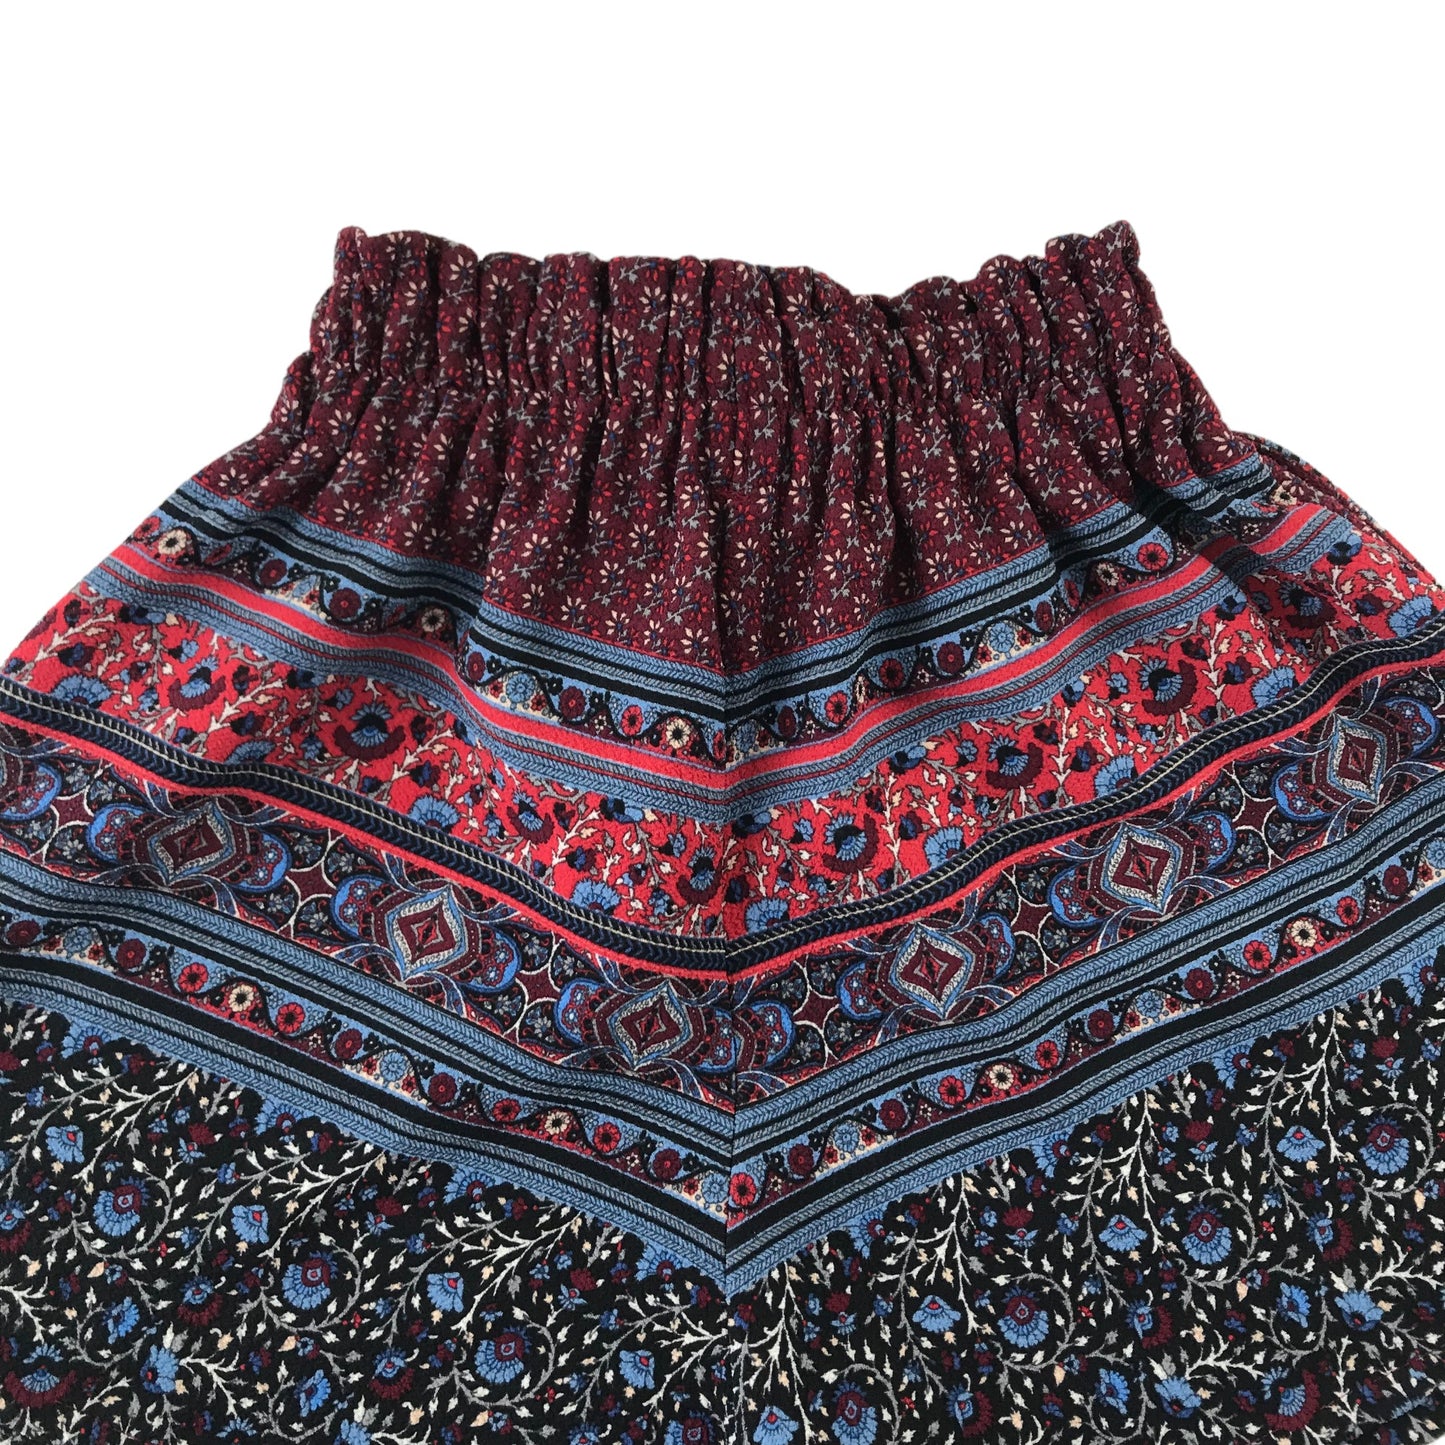 Bershka Shorts Age 12-13 Burgundy and Blue High Waist with Fancy Patterns